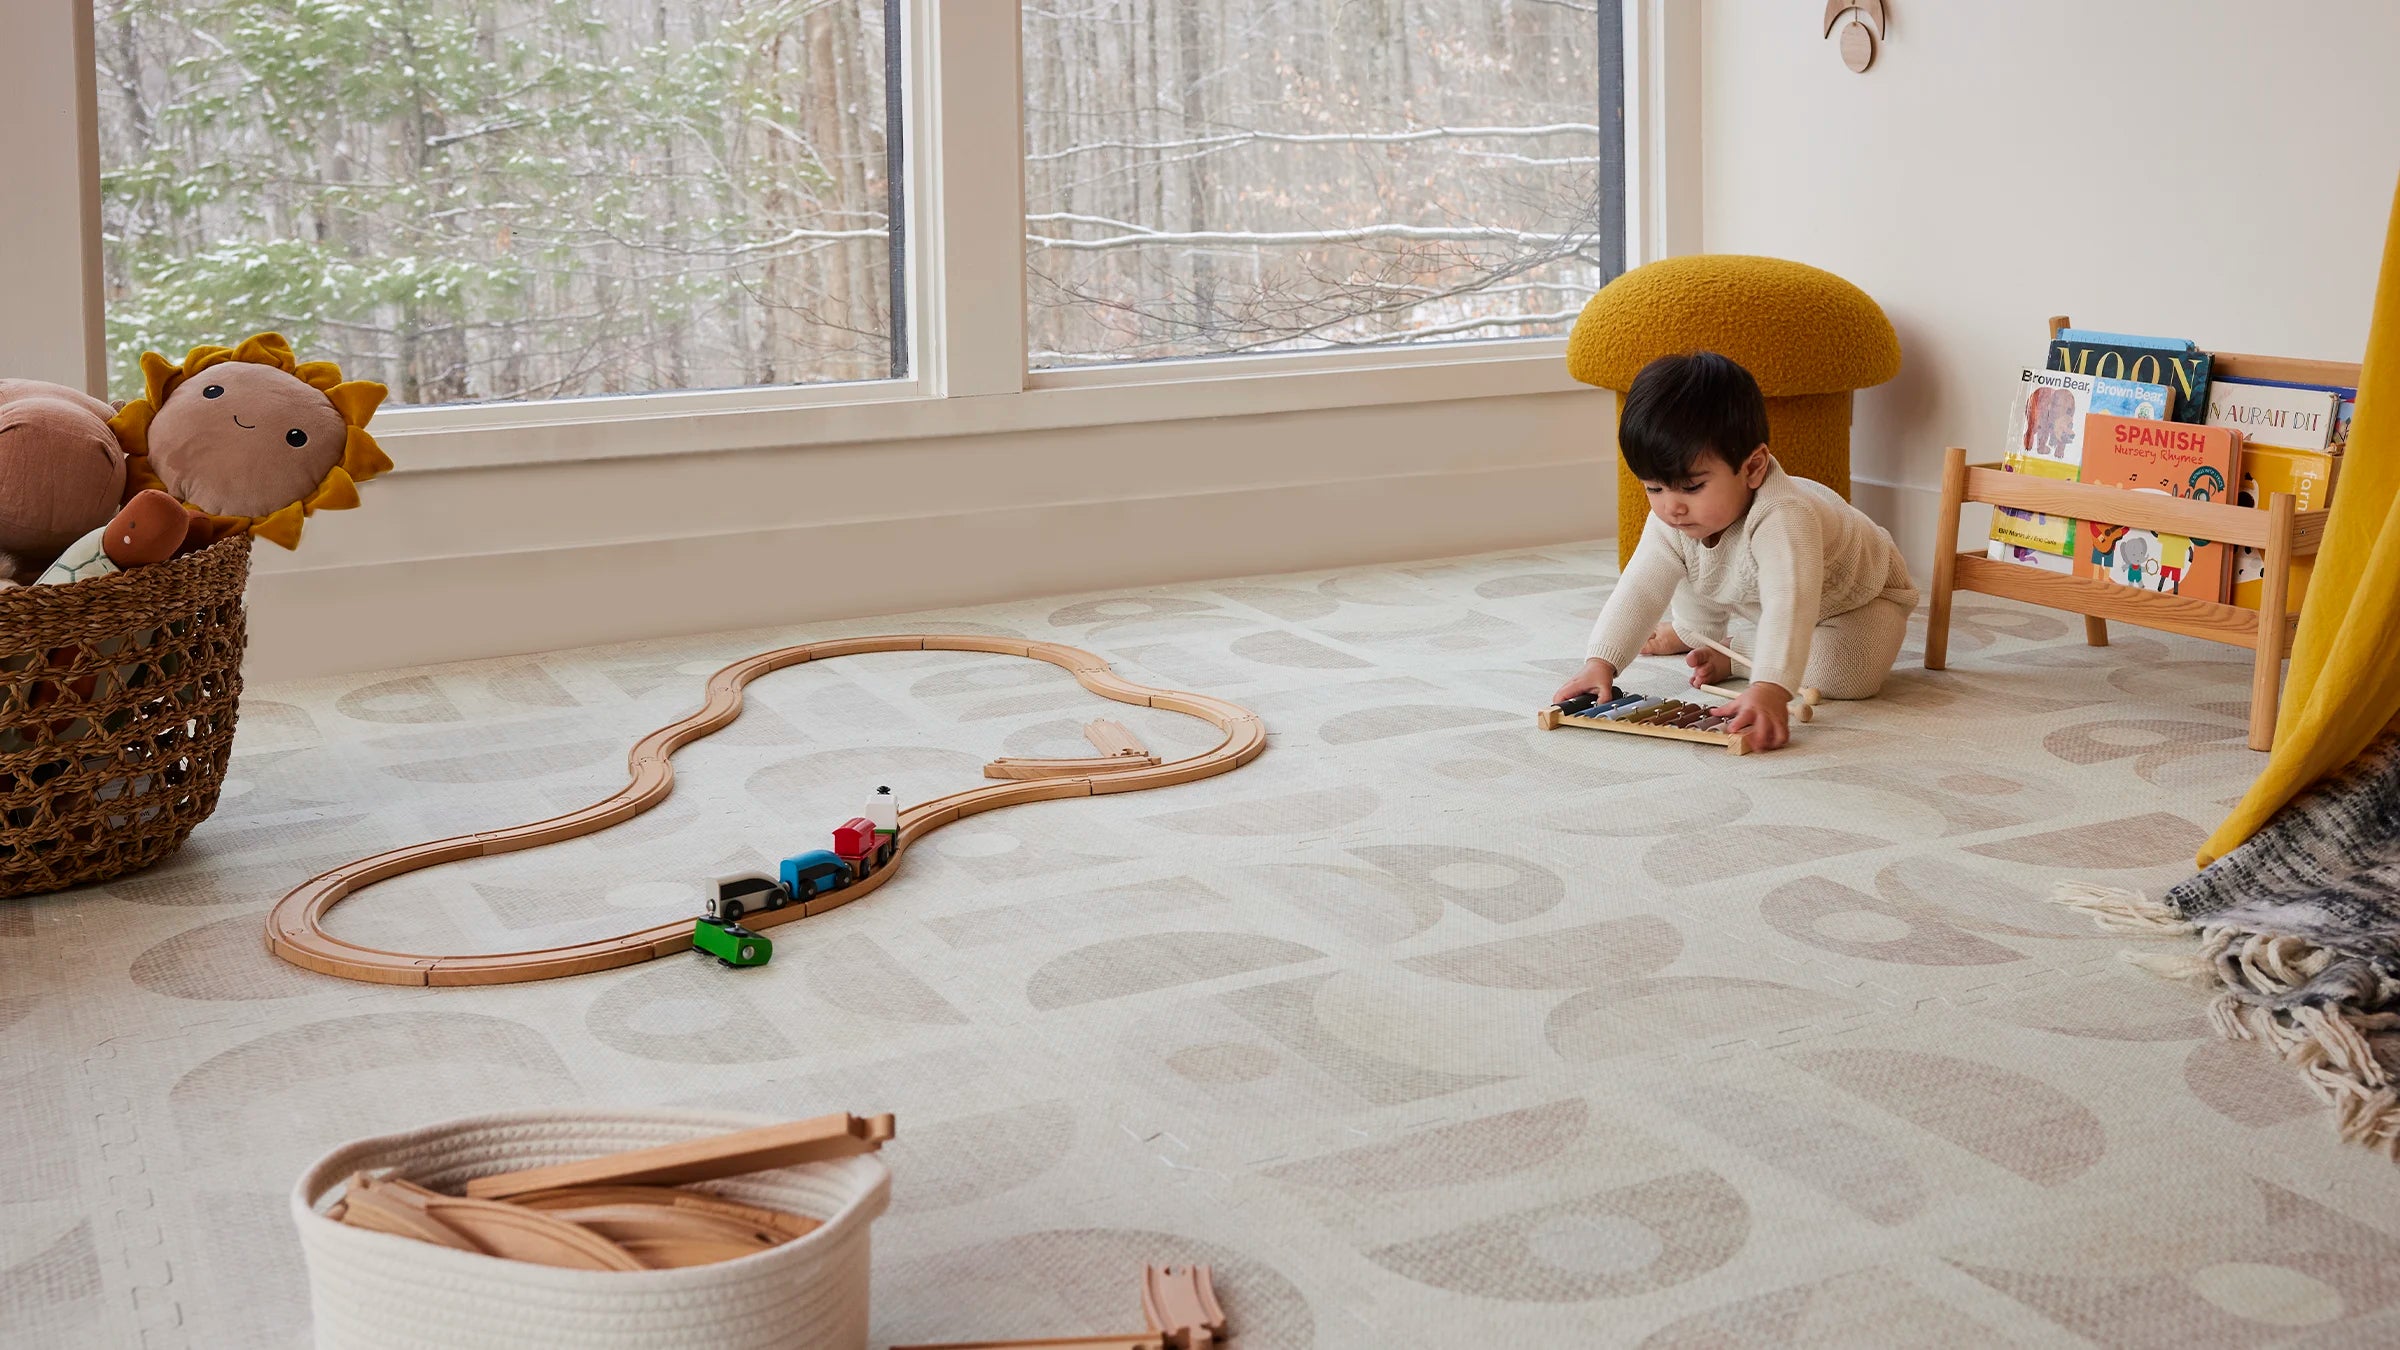 Luna sandstone play mat shown in play room with wooden train tracks, a basket of stuffed toys, a small bookshelf, and baby boy playing with xylophone  